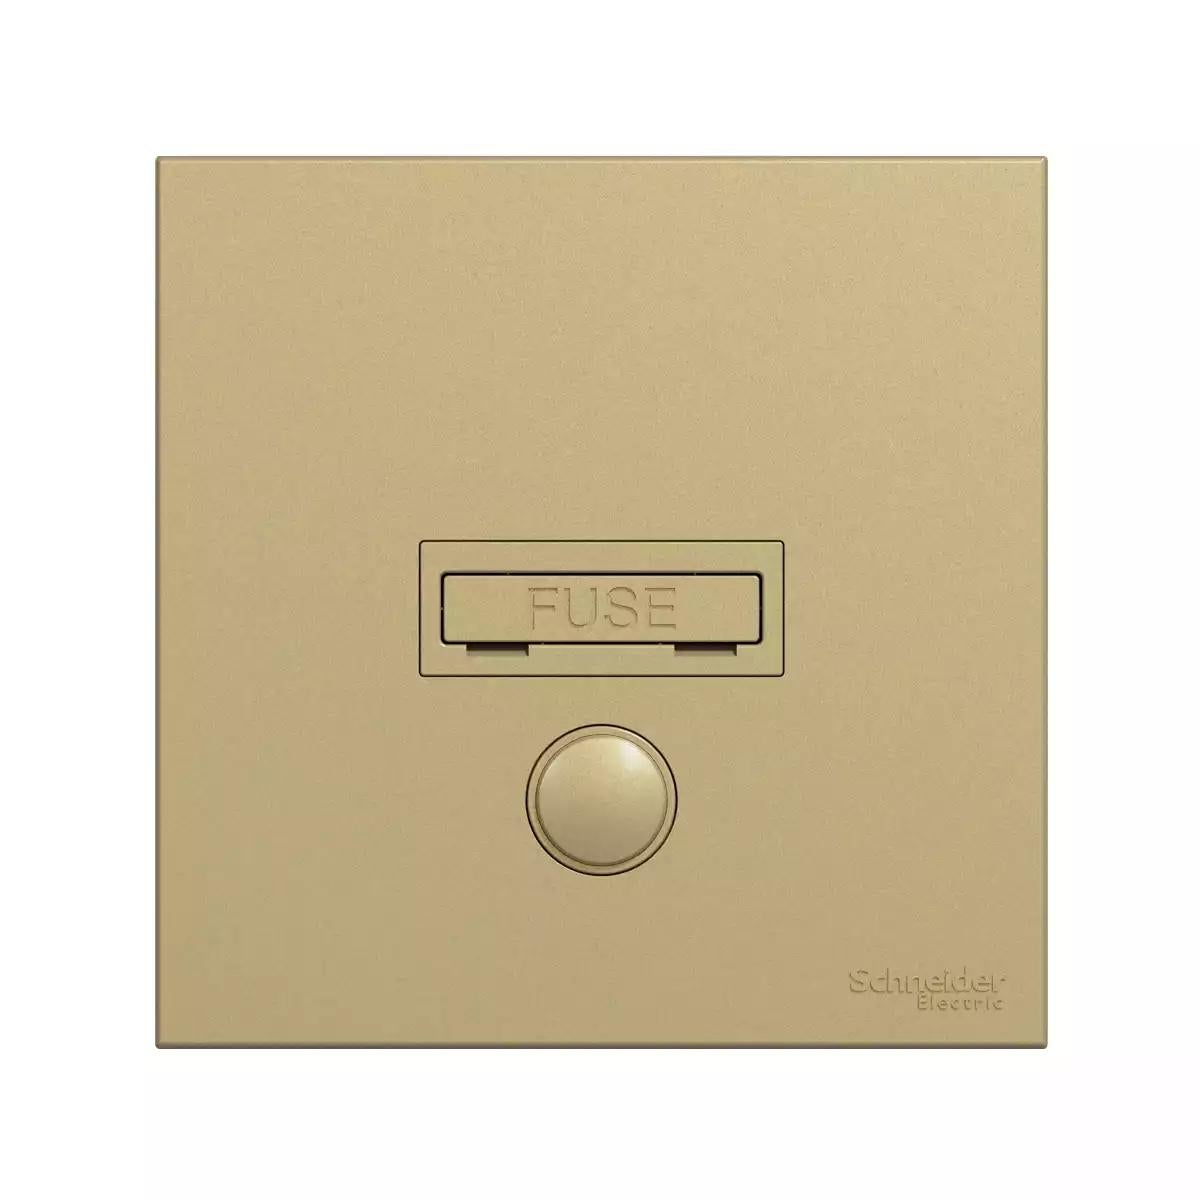 AvatarOn C Fused Connection Unit, 13A, 250V, 1 gang, Wine Gold